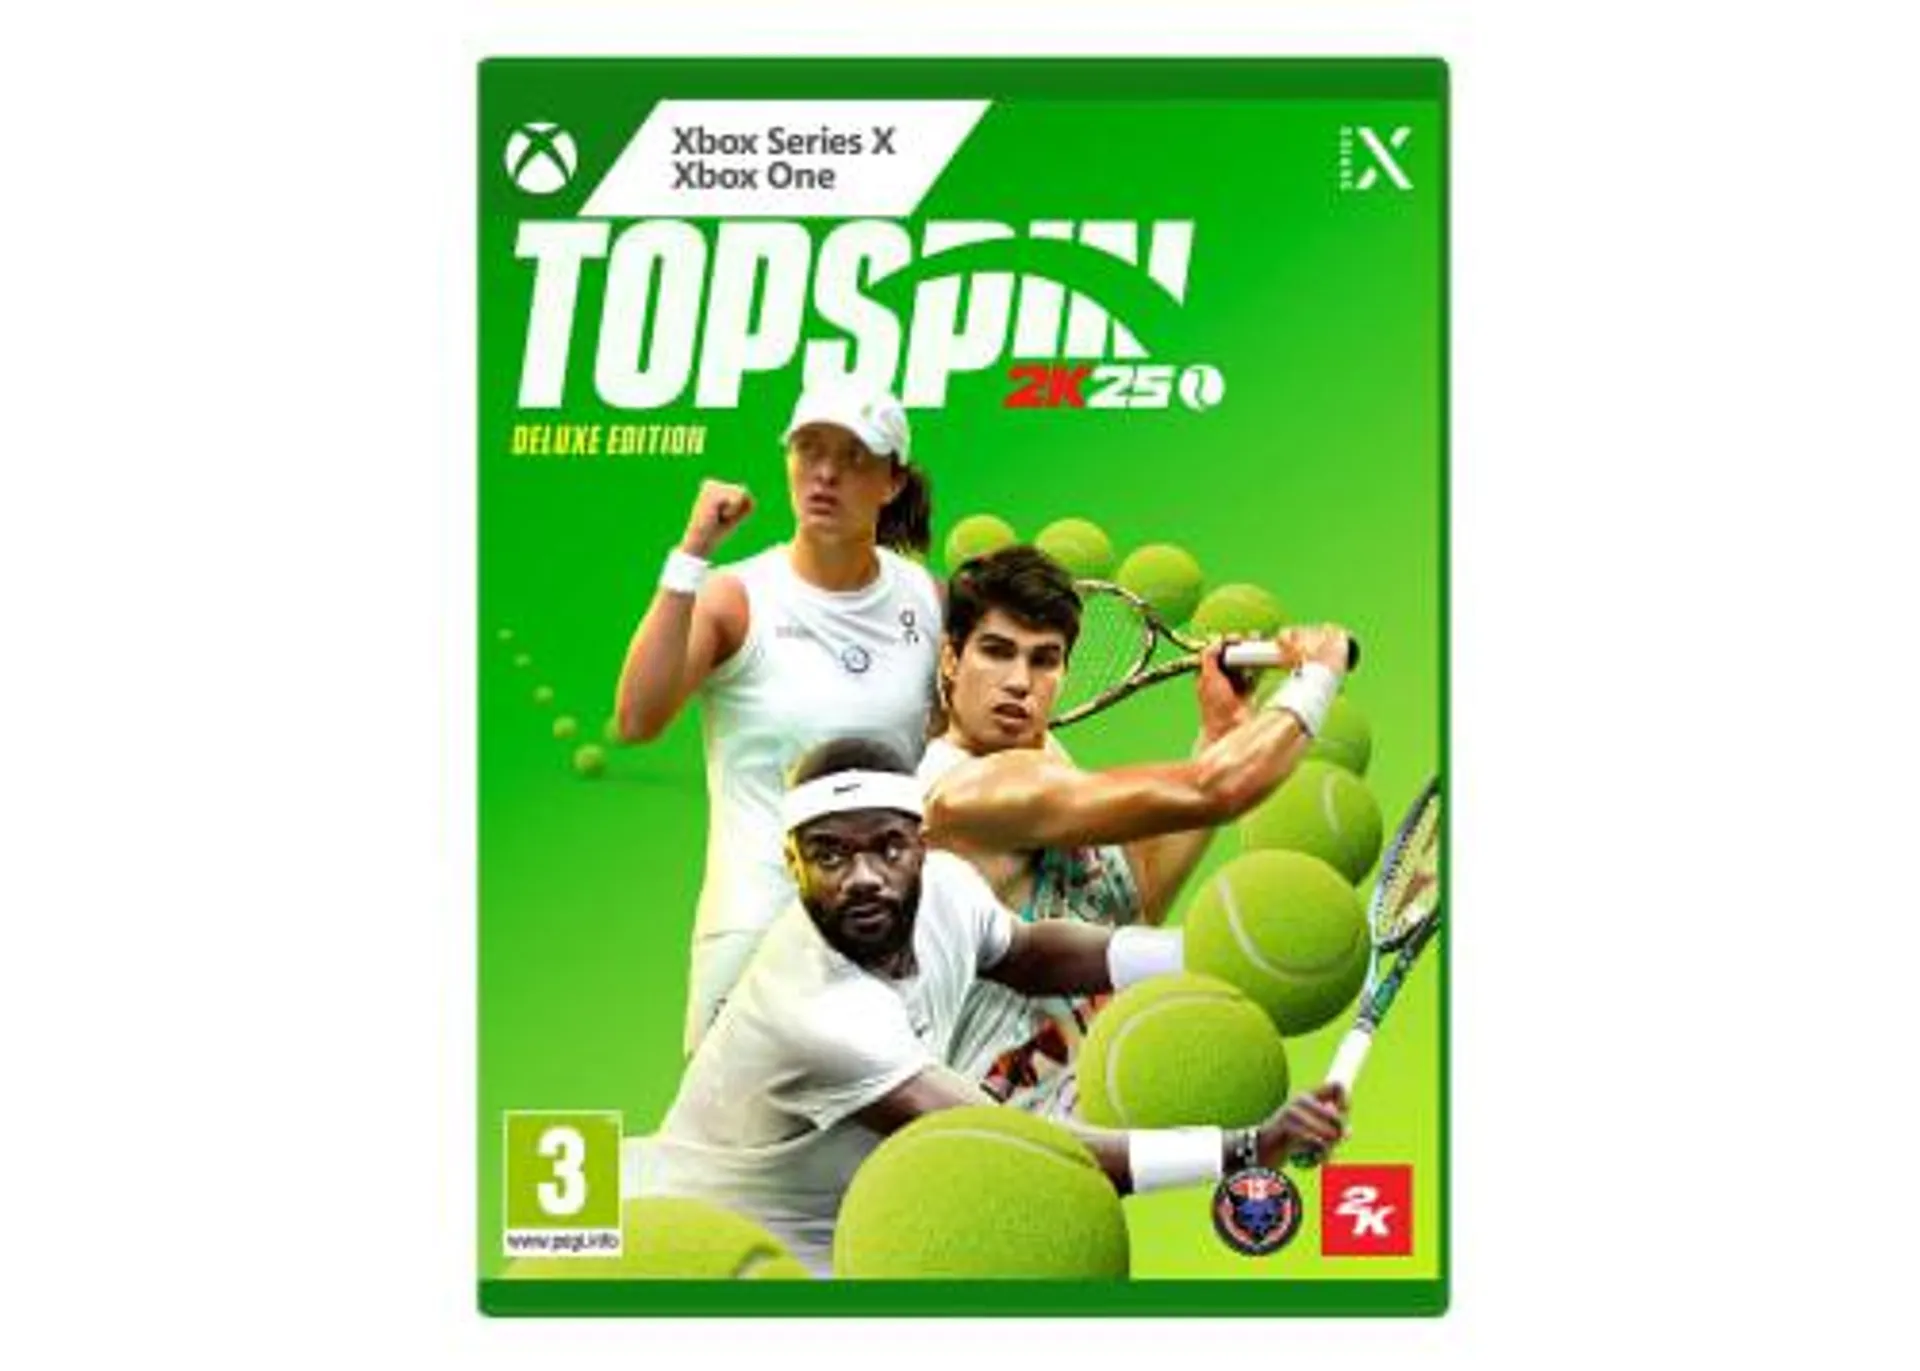 TopSpin 2K25 Deluxe Edition (Xbox Series X)